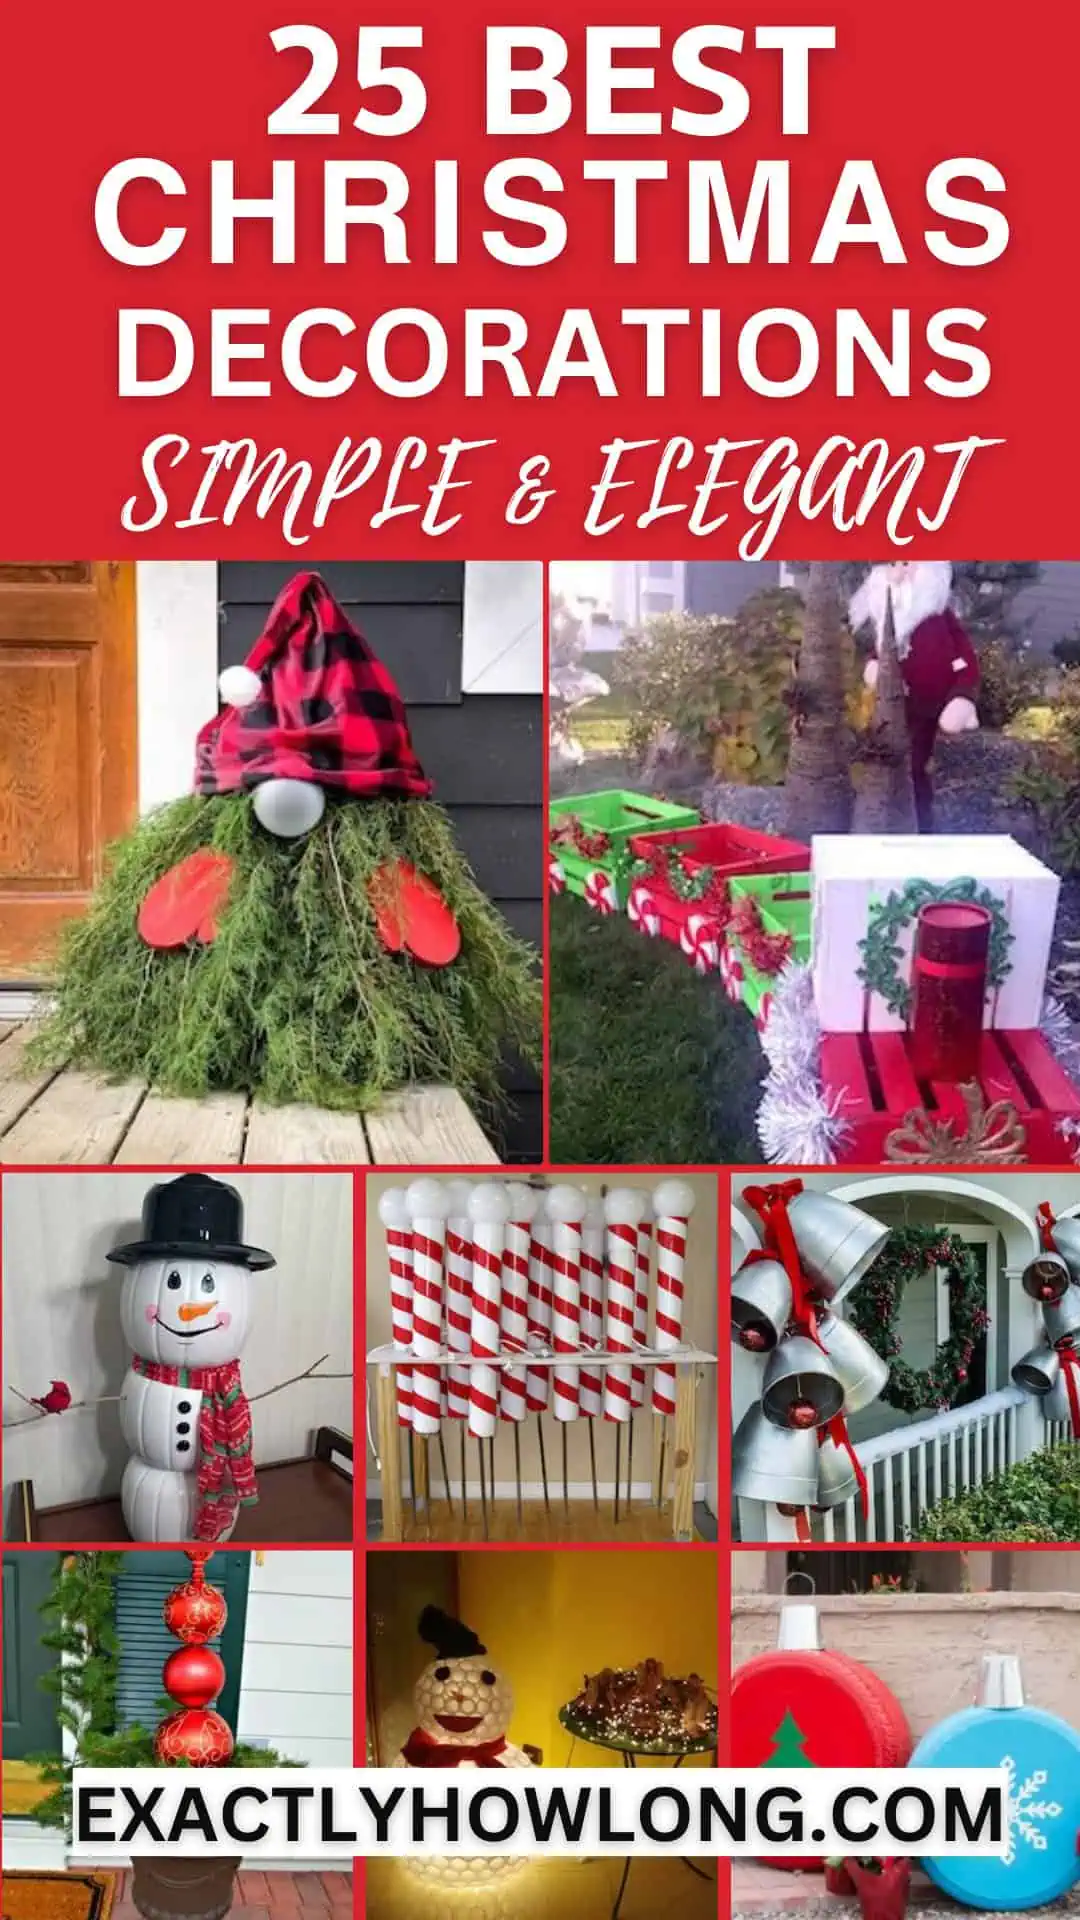 Christmas decorations for home, both indoors and outdoors